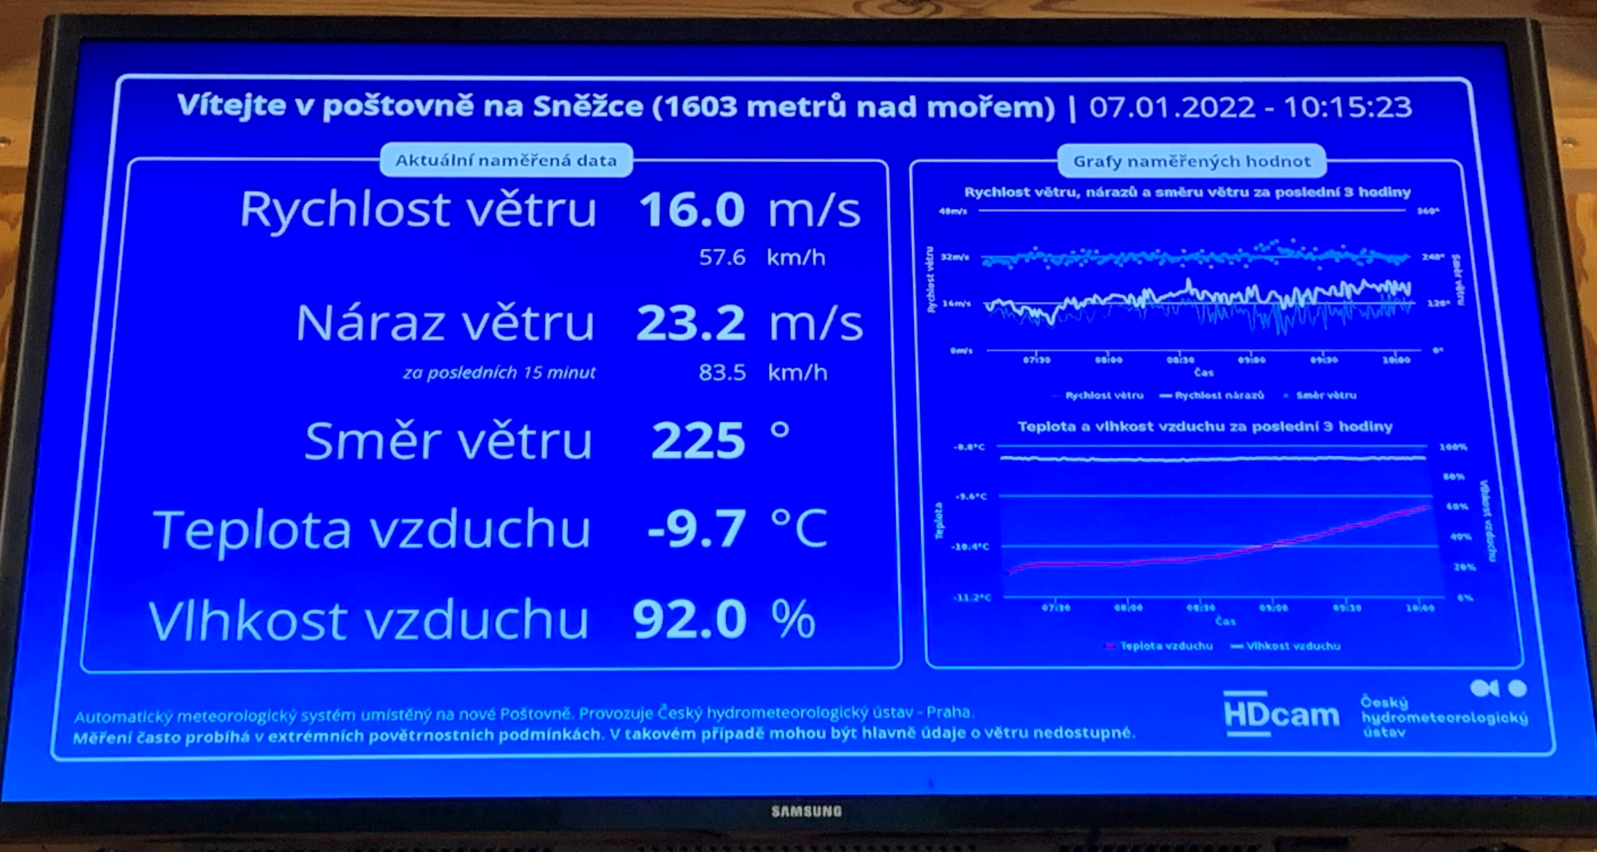 Weather conditions at the summit of Mt. Śnieżka